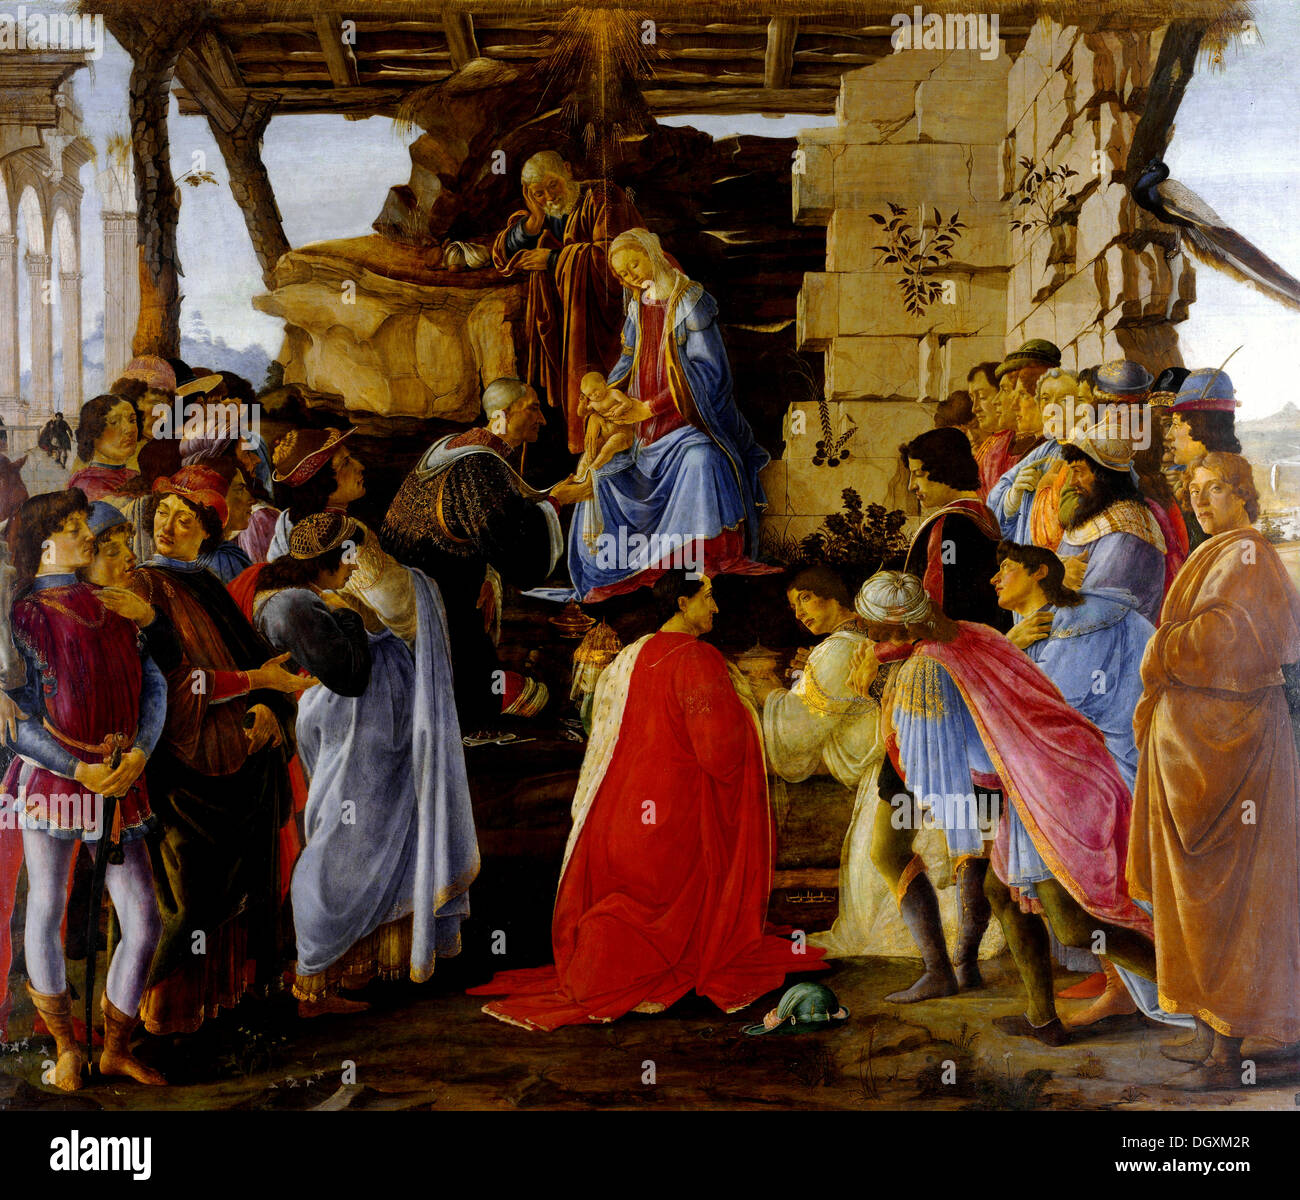 Adoration of the Magi  - by Sandro Botticelli, 1475 - Editorial use only. Stock Photo